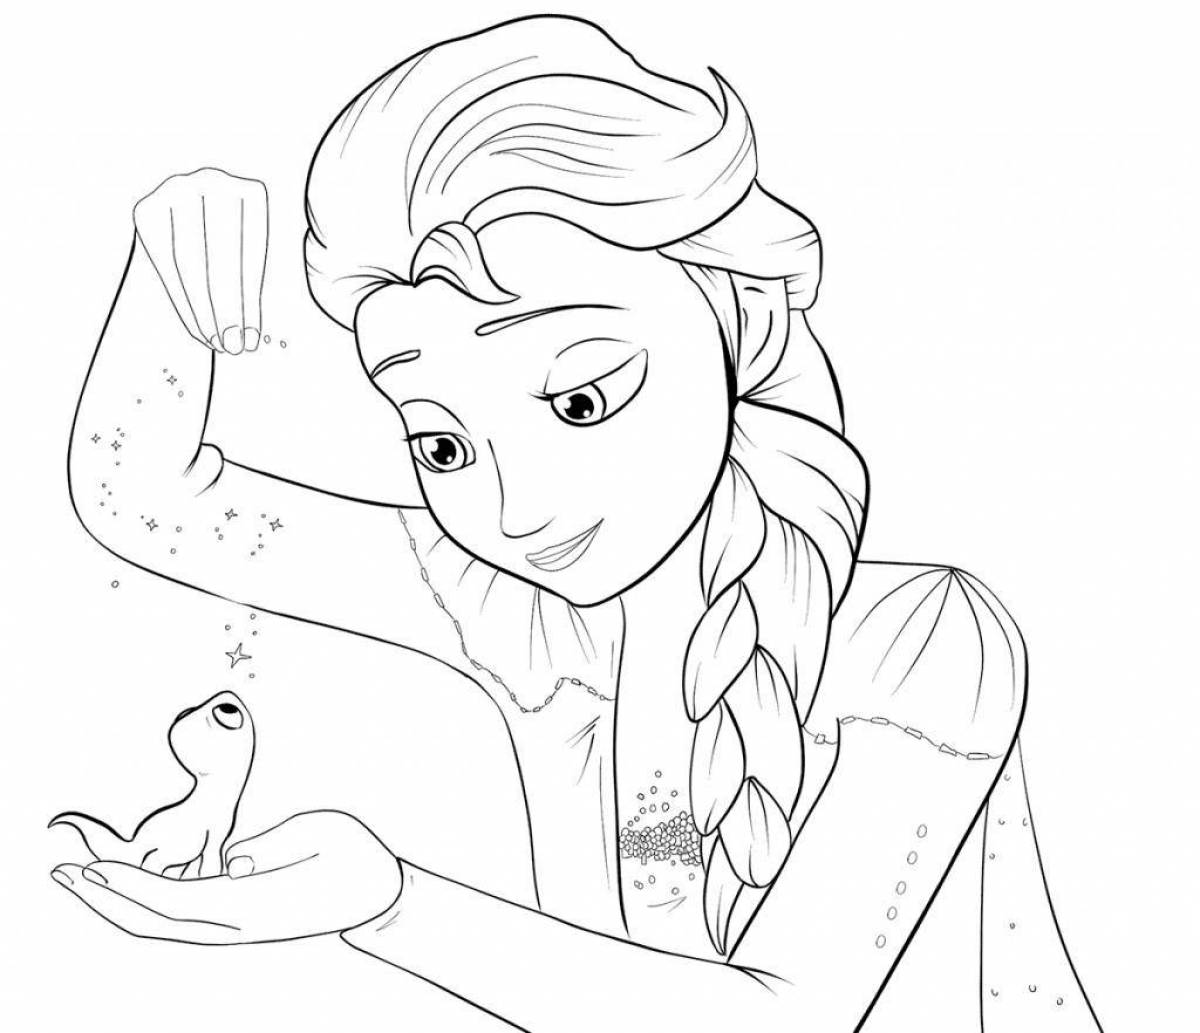 Glowing elsa coloring page